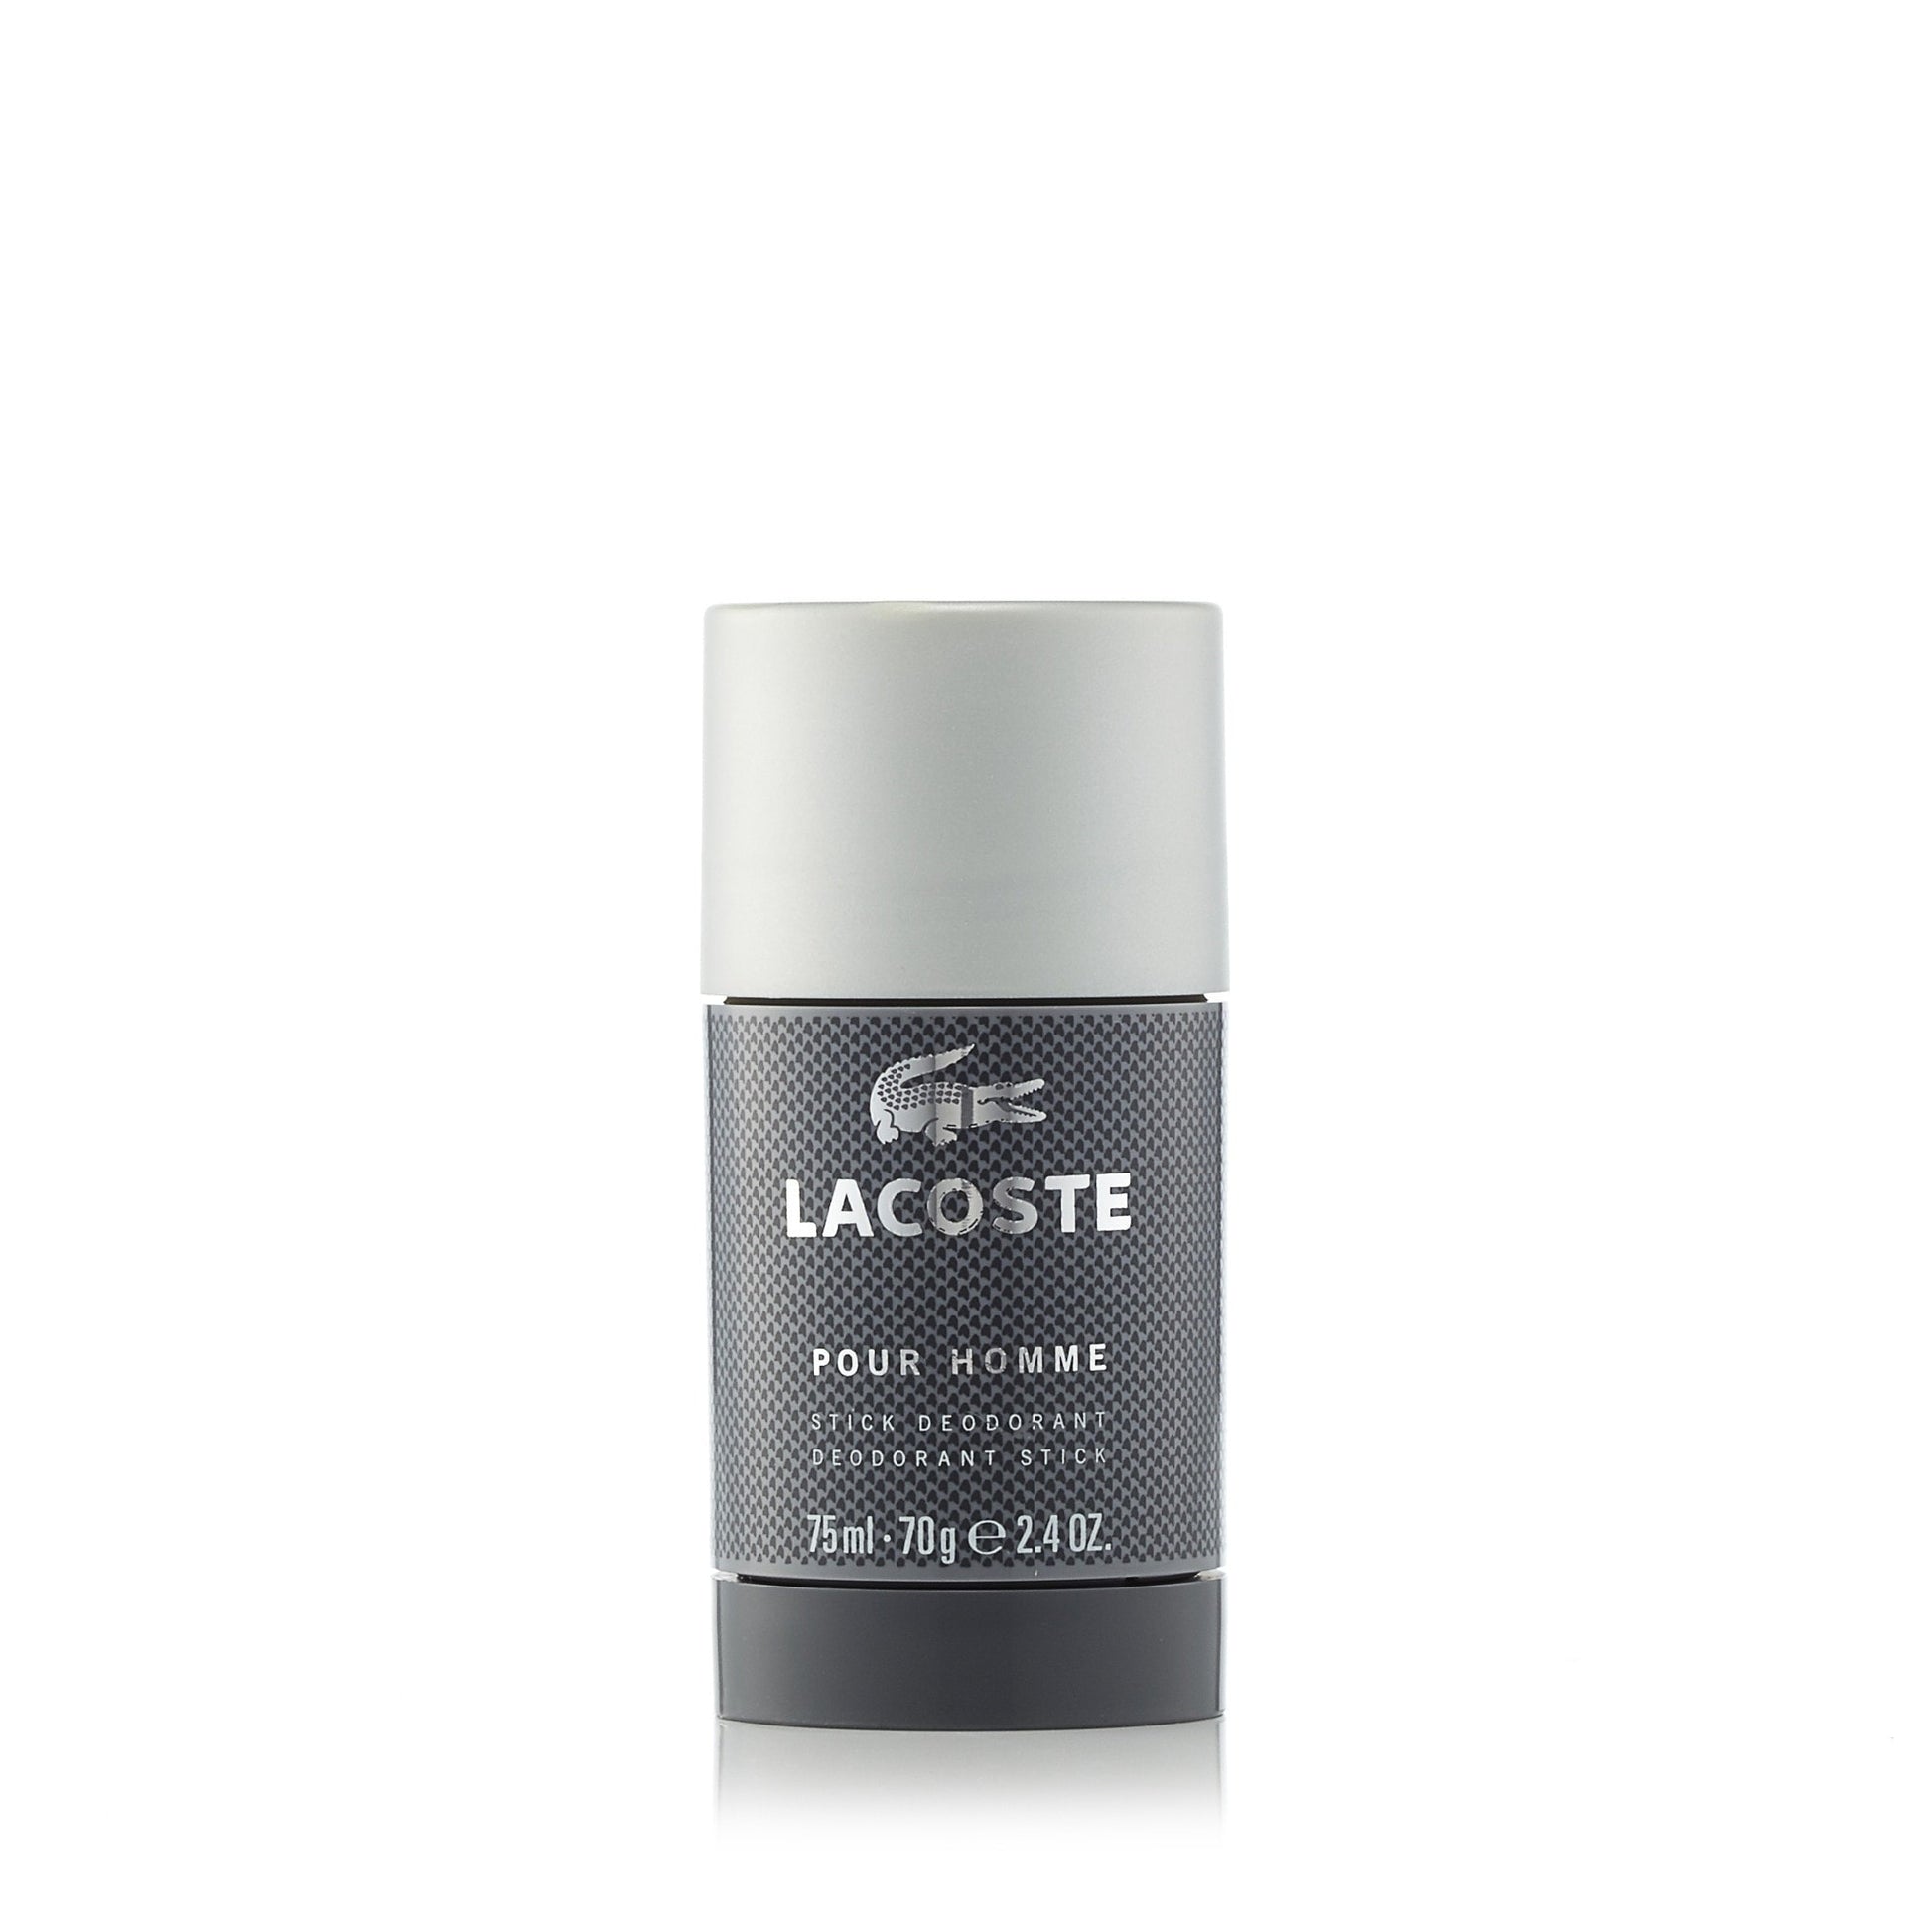 Lacoste Pour Homme Deodorant for Men by Lacoste 2.4 oz. slider image, Click to open in model